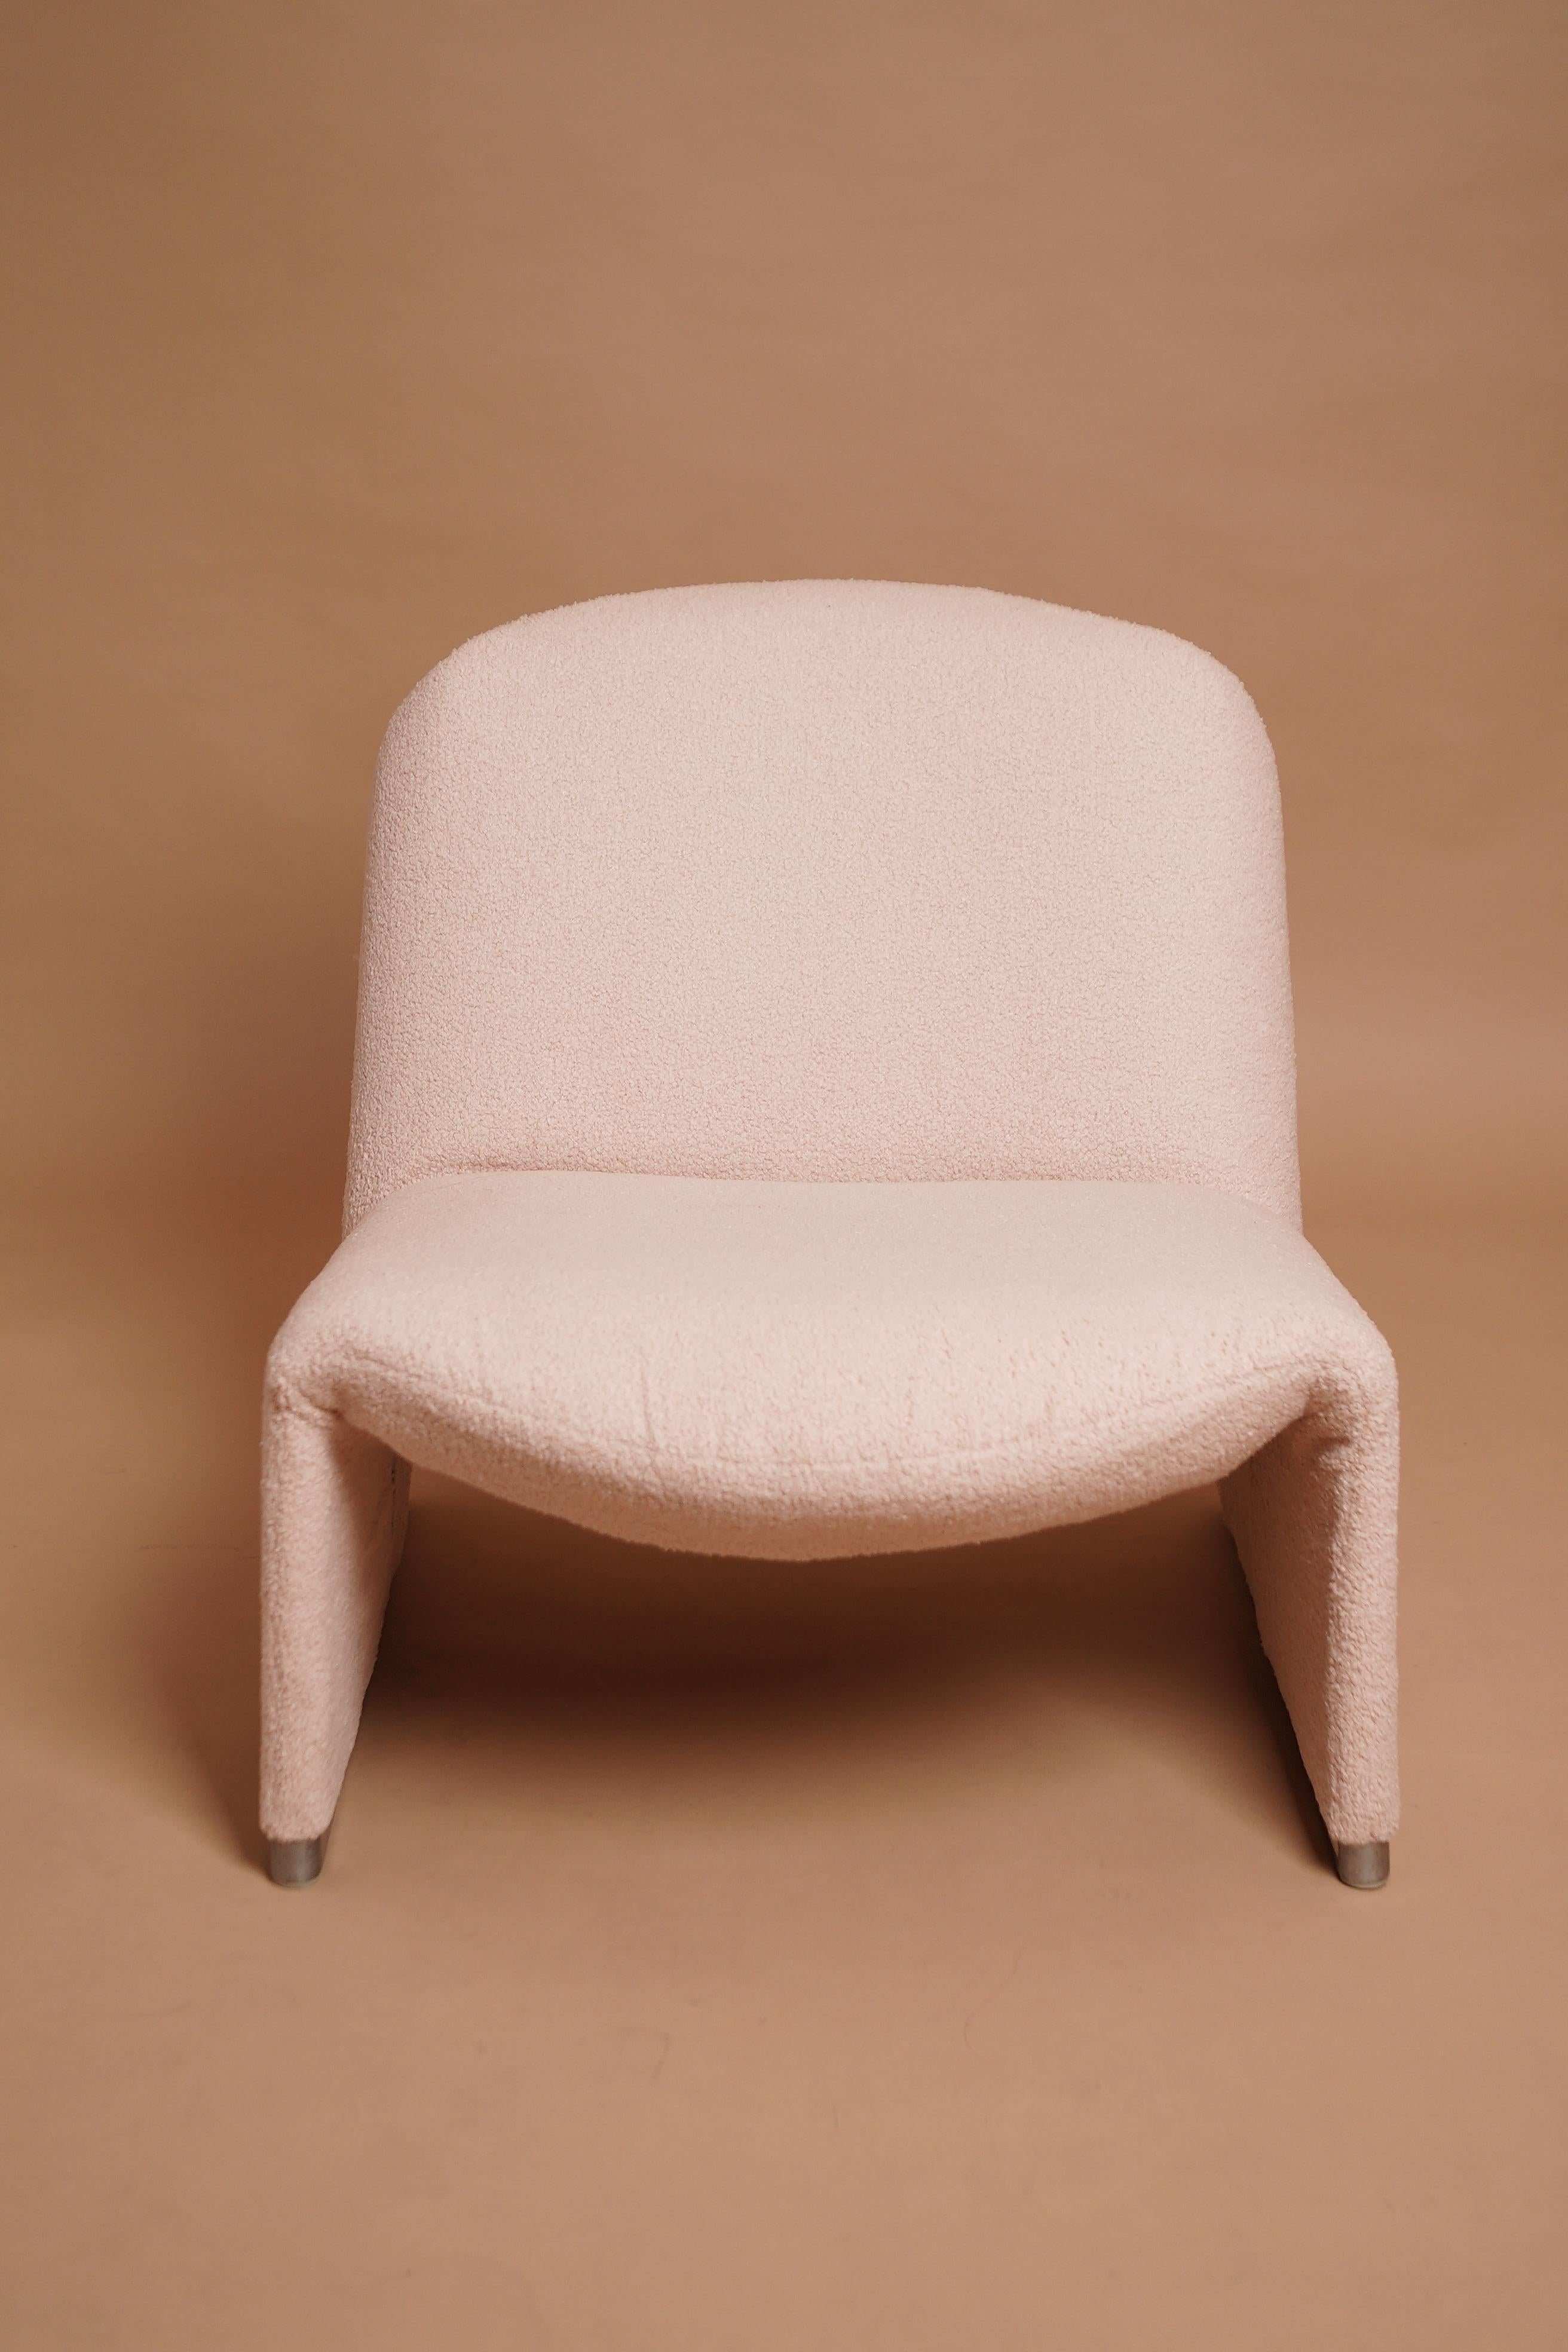 Mid-Century Modern Alky Chair By Giancarlo Piretti for Castelli 1970s For Sale